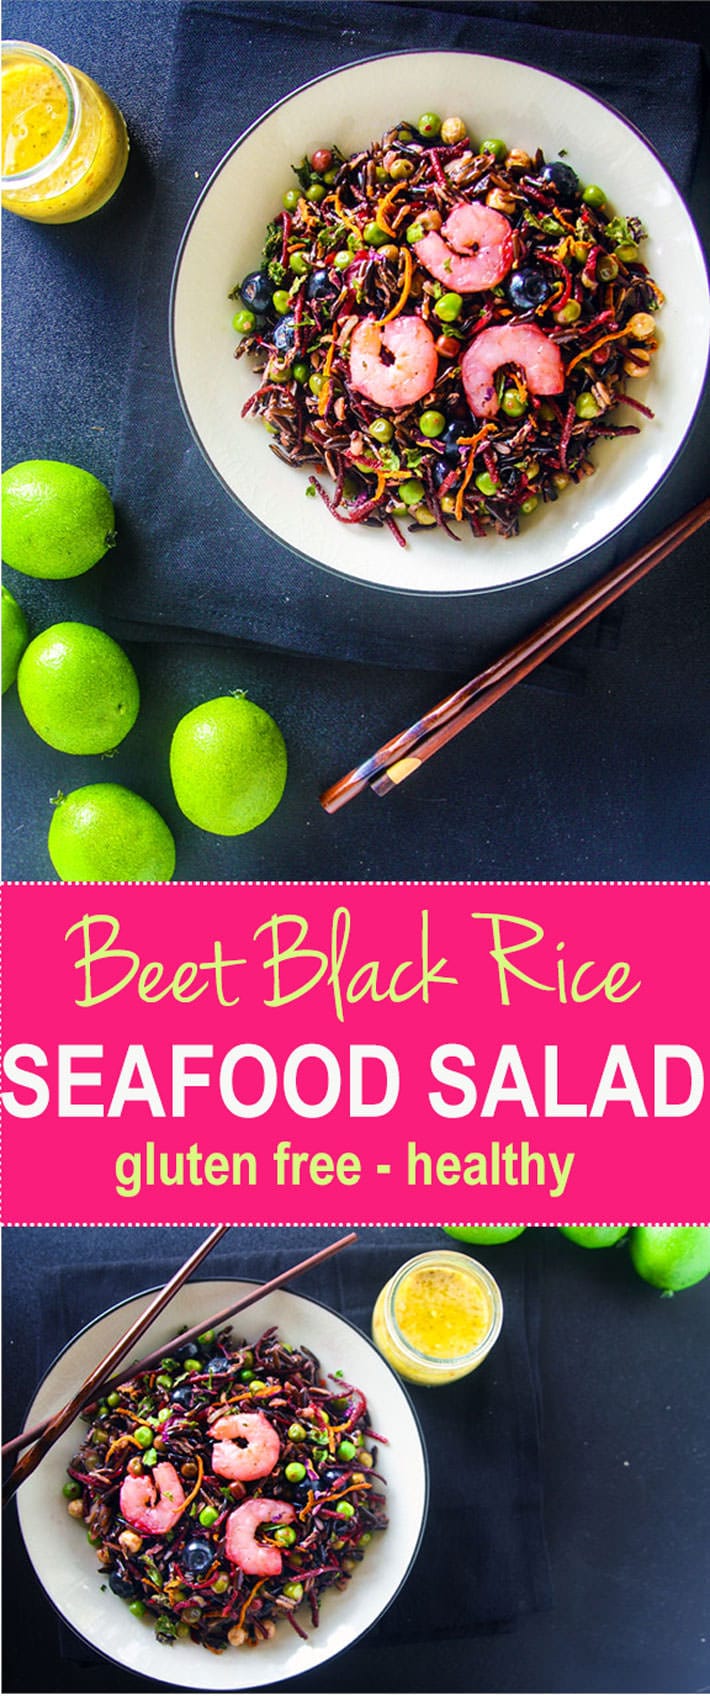 Load up on antioxidants with a gluten free shrimp salad! With beets, black rice, and a lemon-lime vinaigrette, this powerhouse salad is great for "Spring Cleaning" your diet! It's colorful, flavorful, and protein packed! Clean eating made tasty!